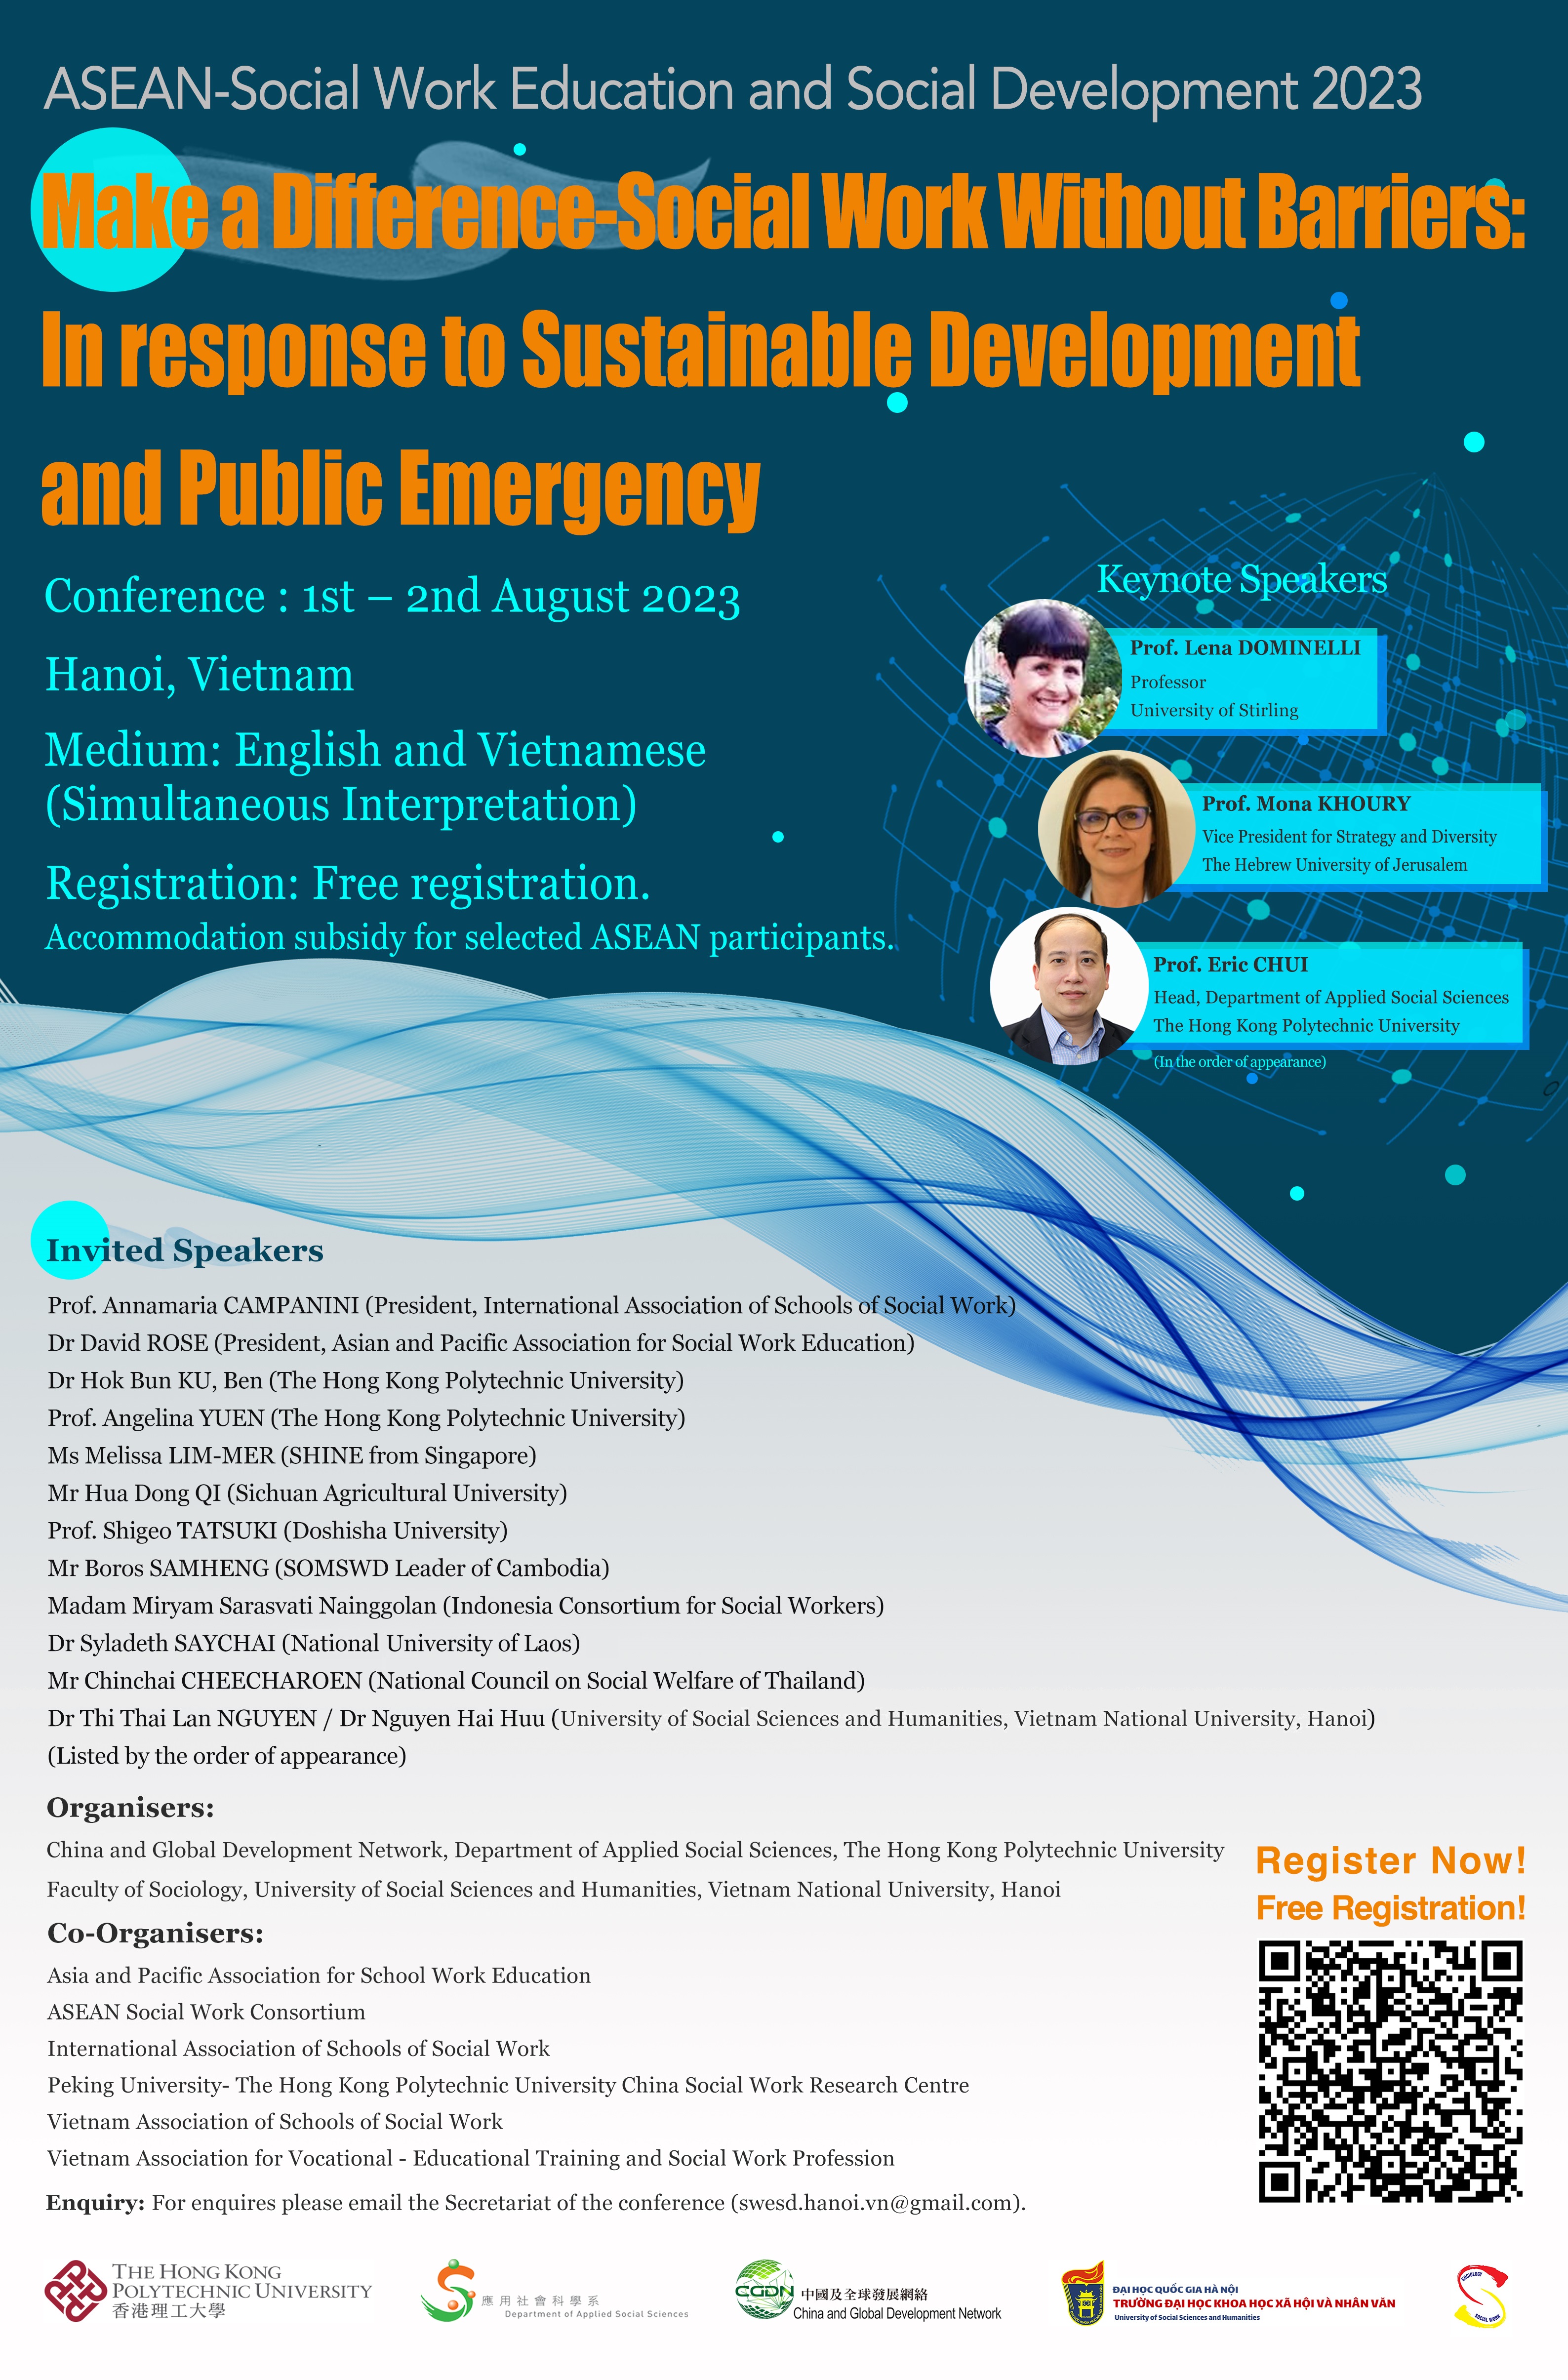 20230801-02 China Network Vietnam Conference Poster_revised 2